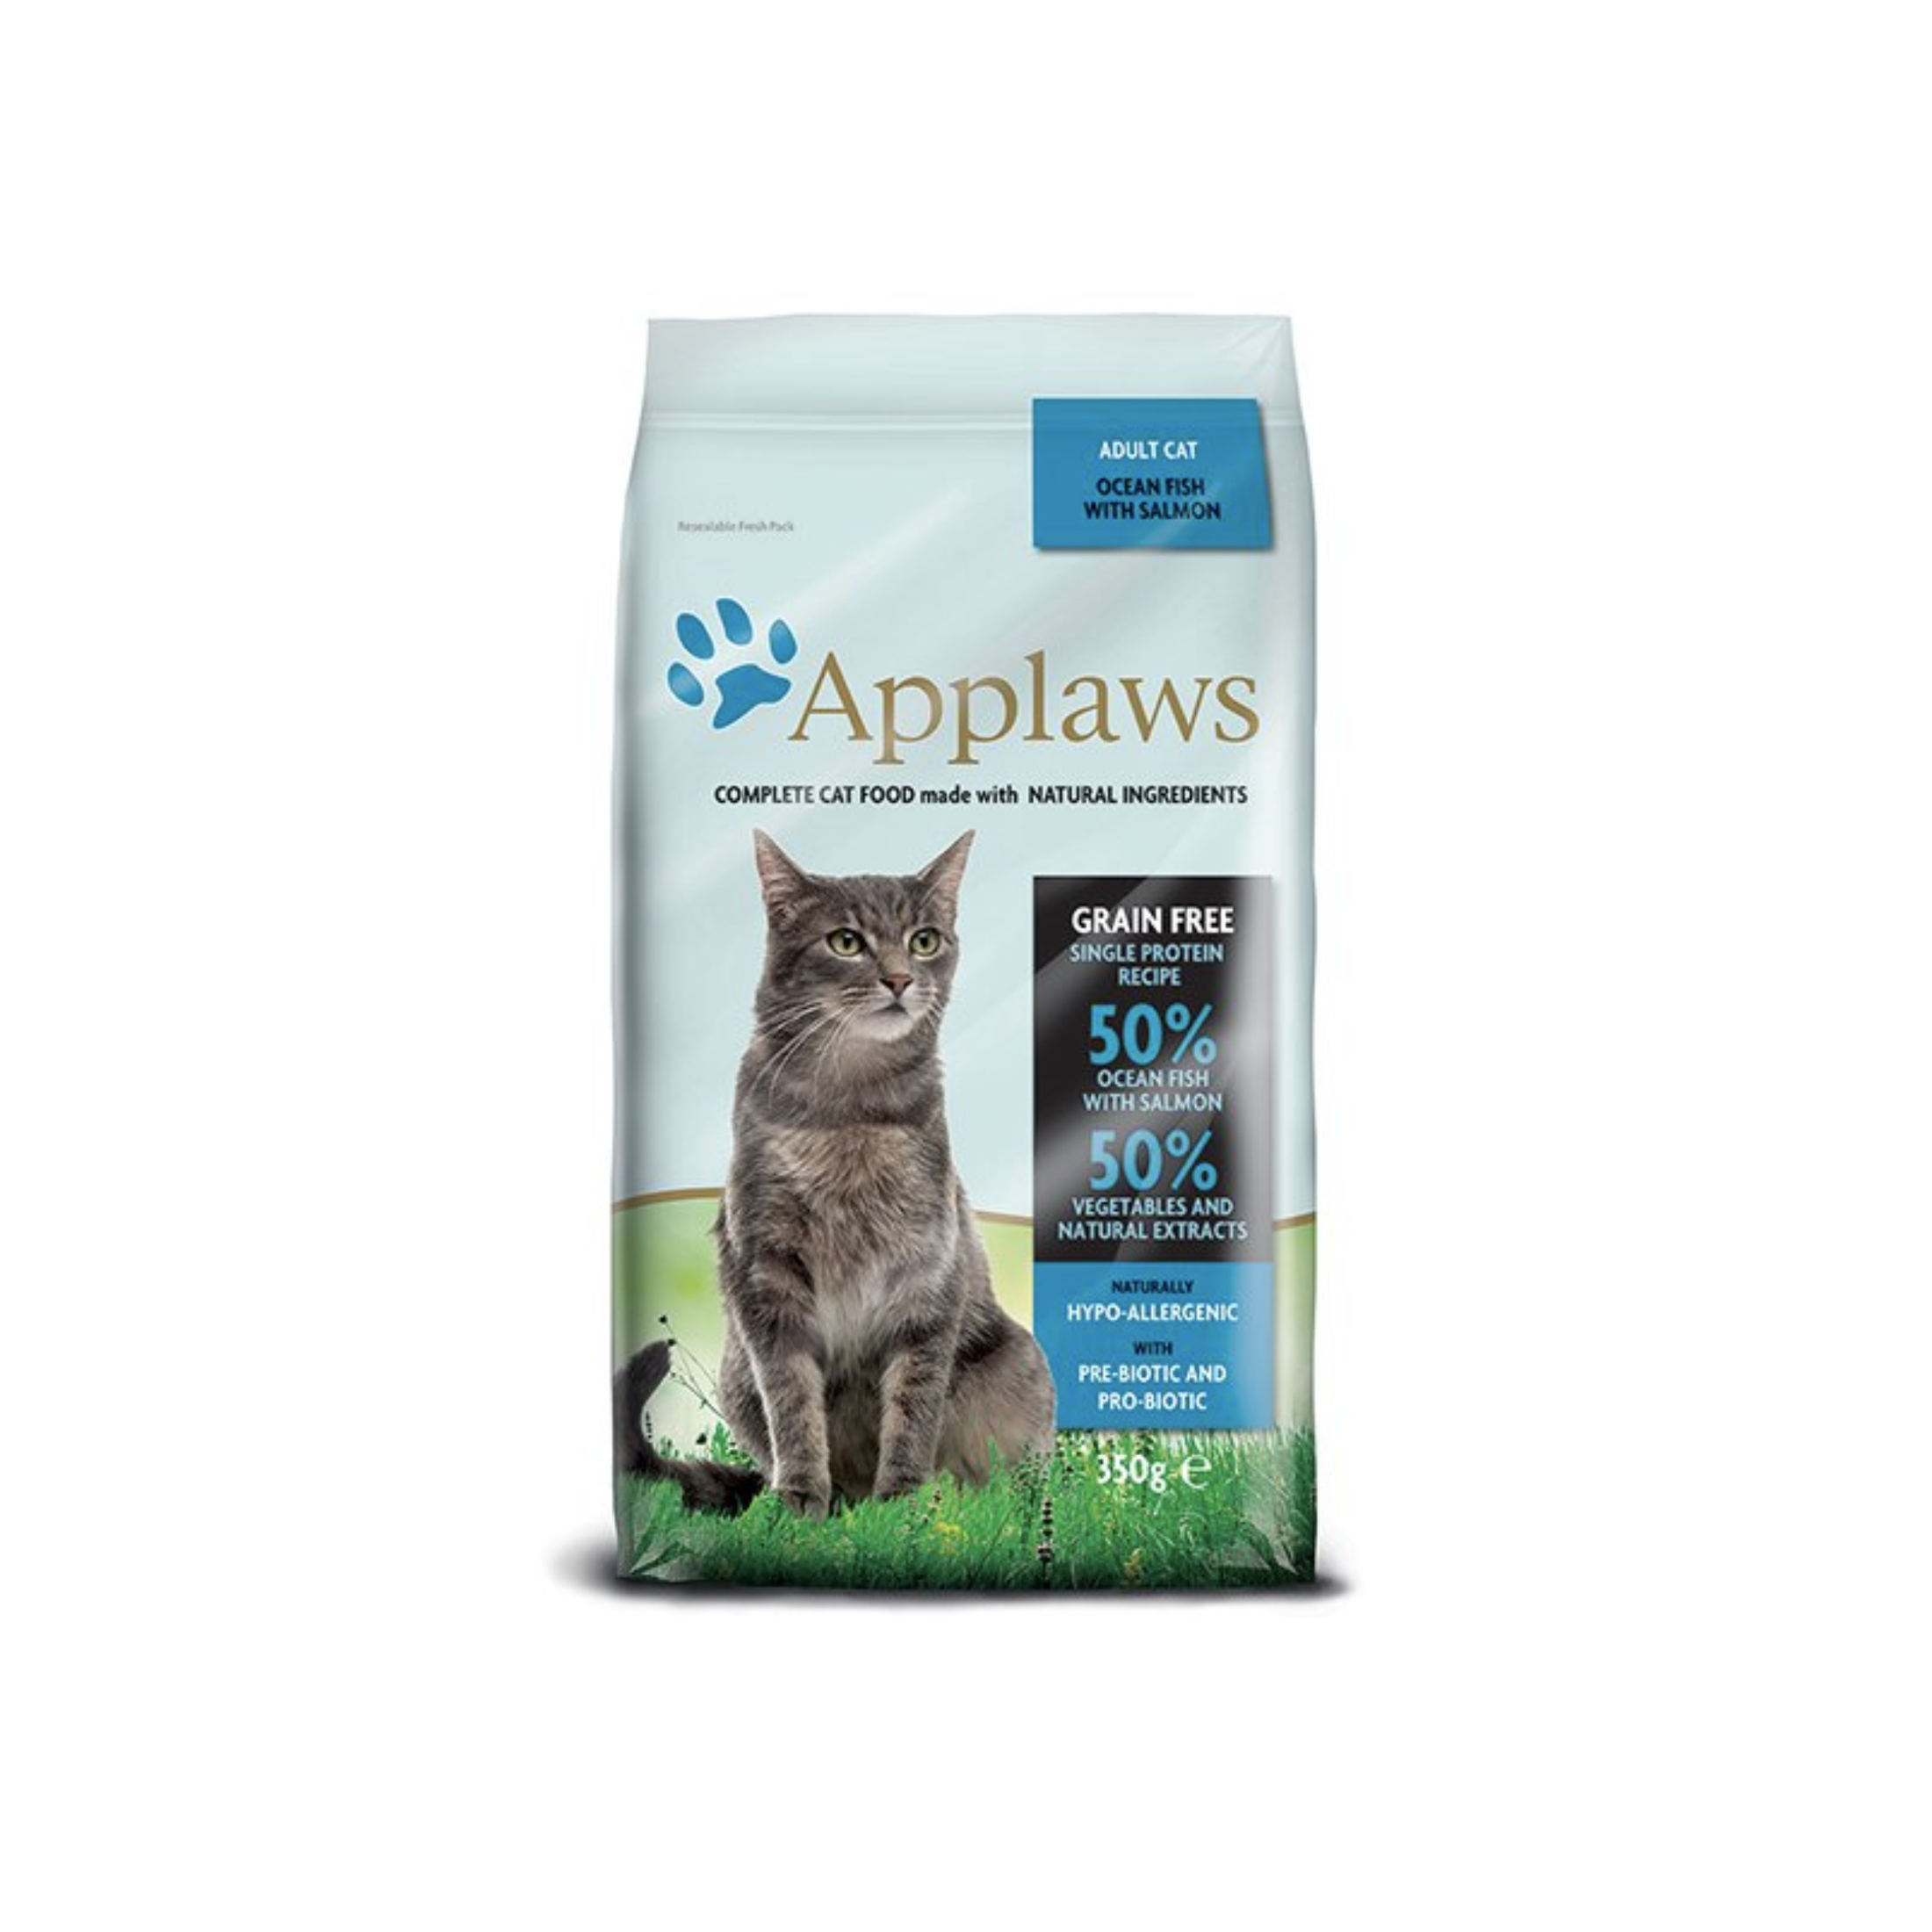 Applaws Adult Dry Cat Food - Ocean Fish with Salmon, Grain Free, Single Protein, Naturally Hypo-Allergenic, Pre-Biotic and Pro-Biotic, 1.8 kg